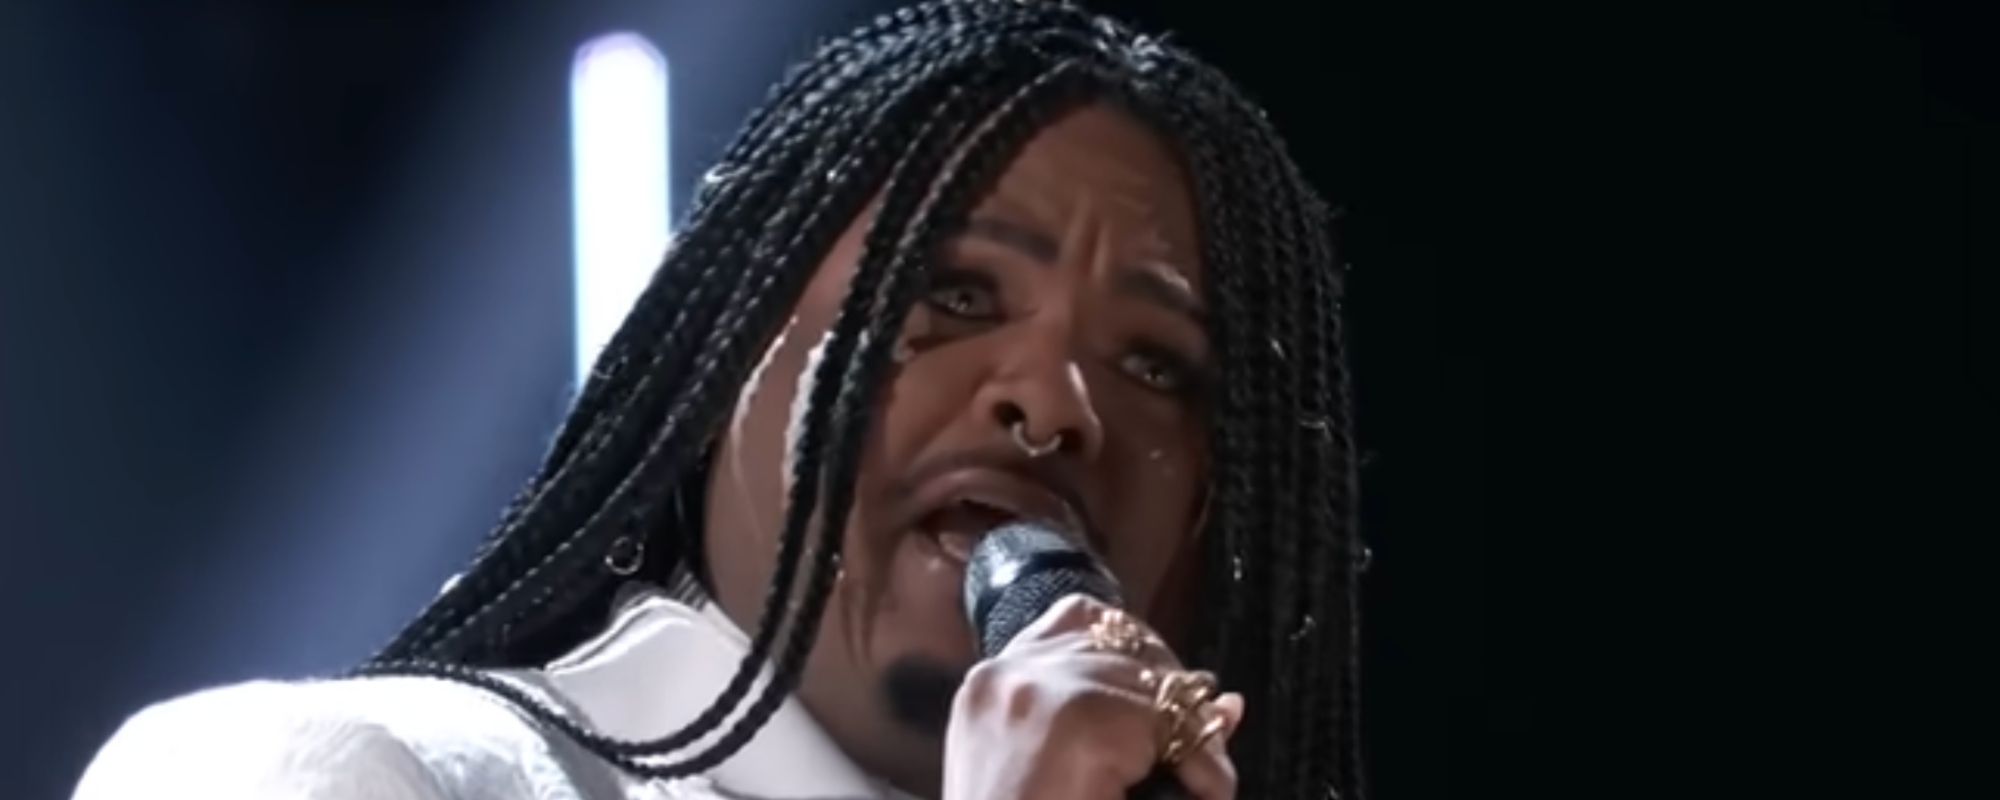 Asher HaVon Brings Soulful Rendition of Donna Summer’s “Last Dance” to ‘The Voice’ Finale